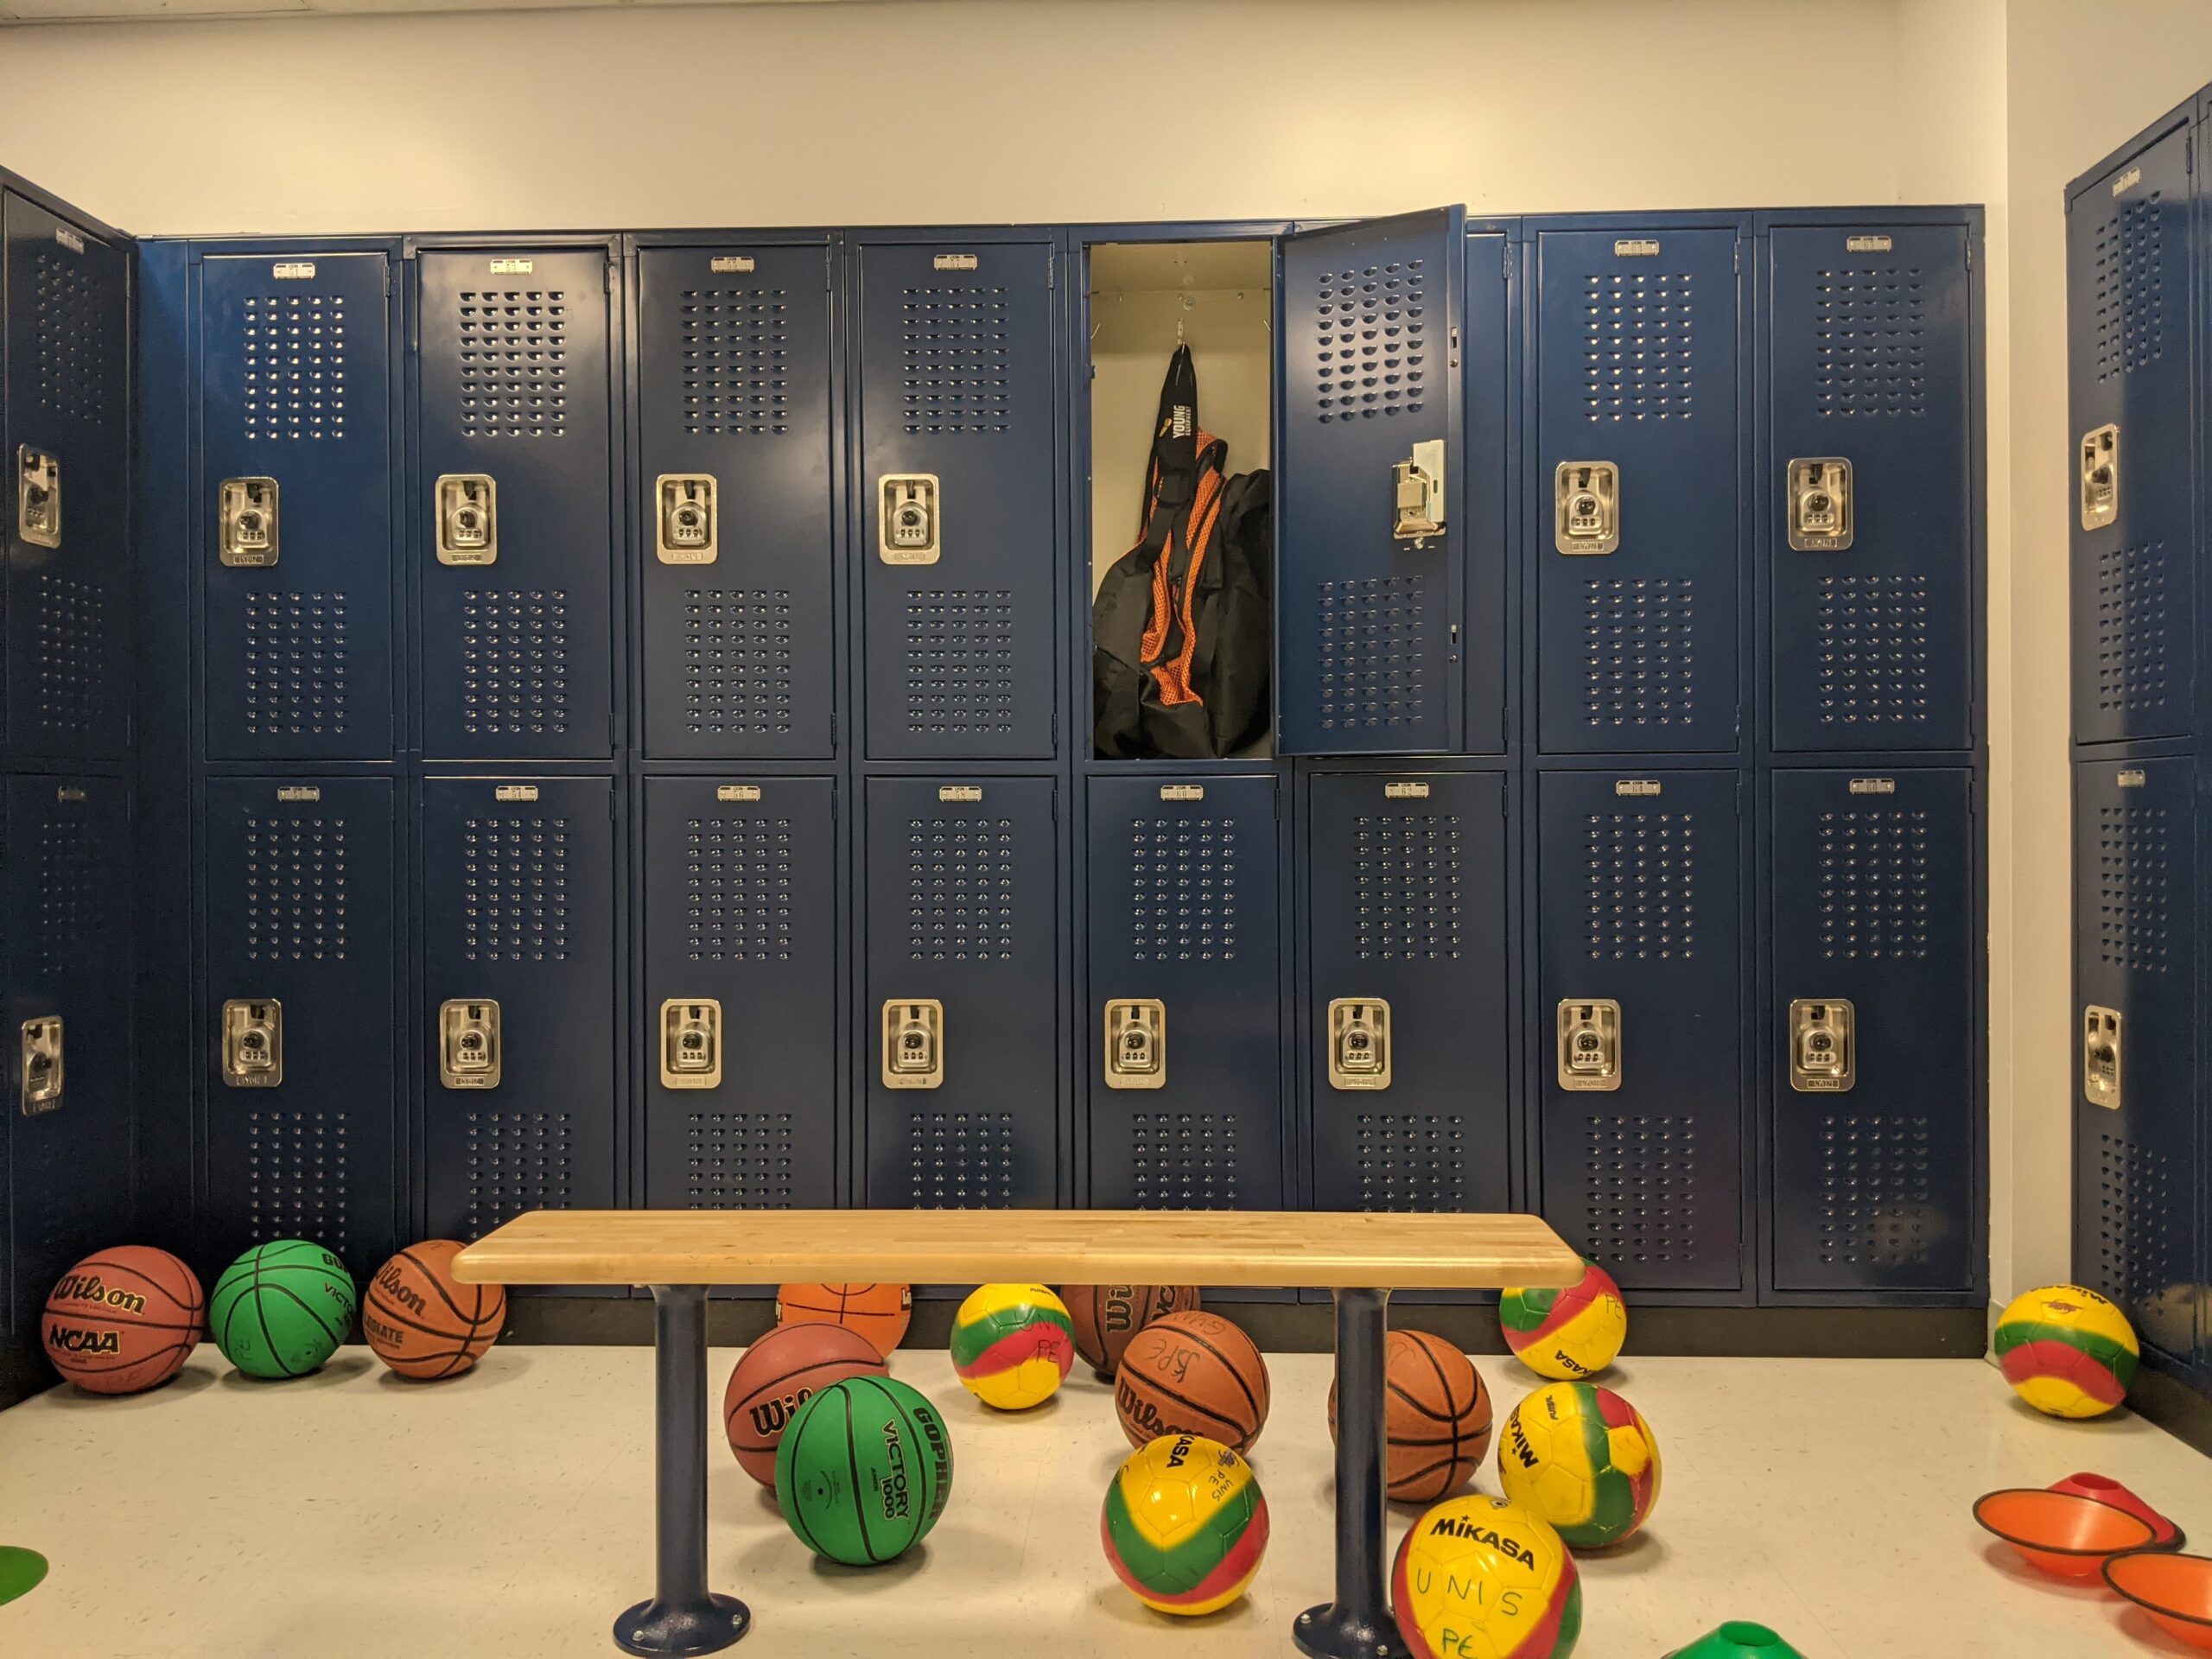 Navy blue vented lockers with one locker open holding a gym bag